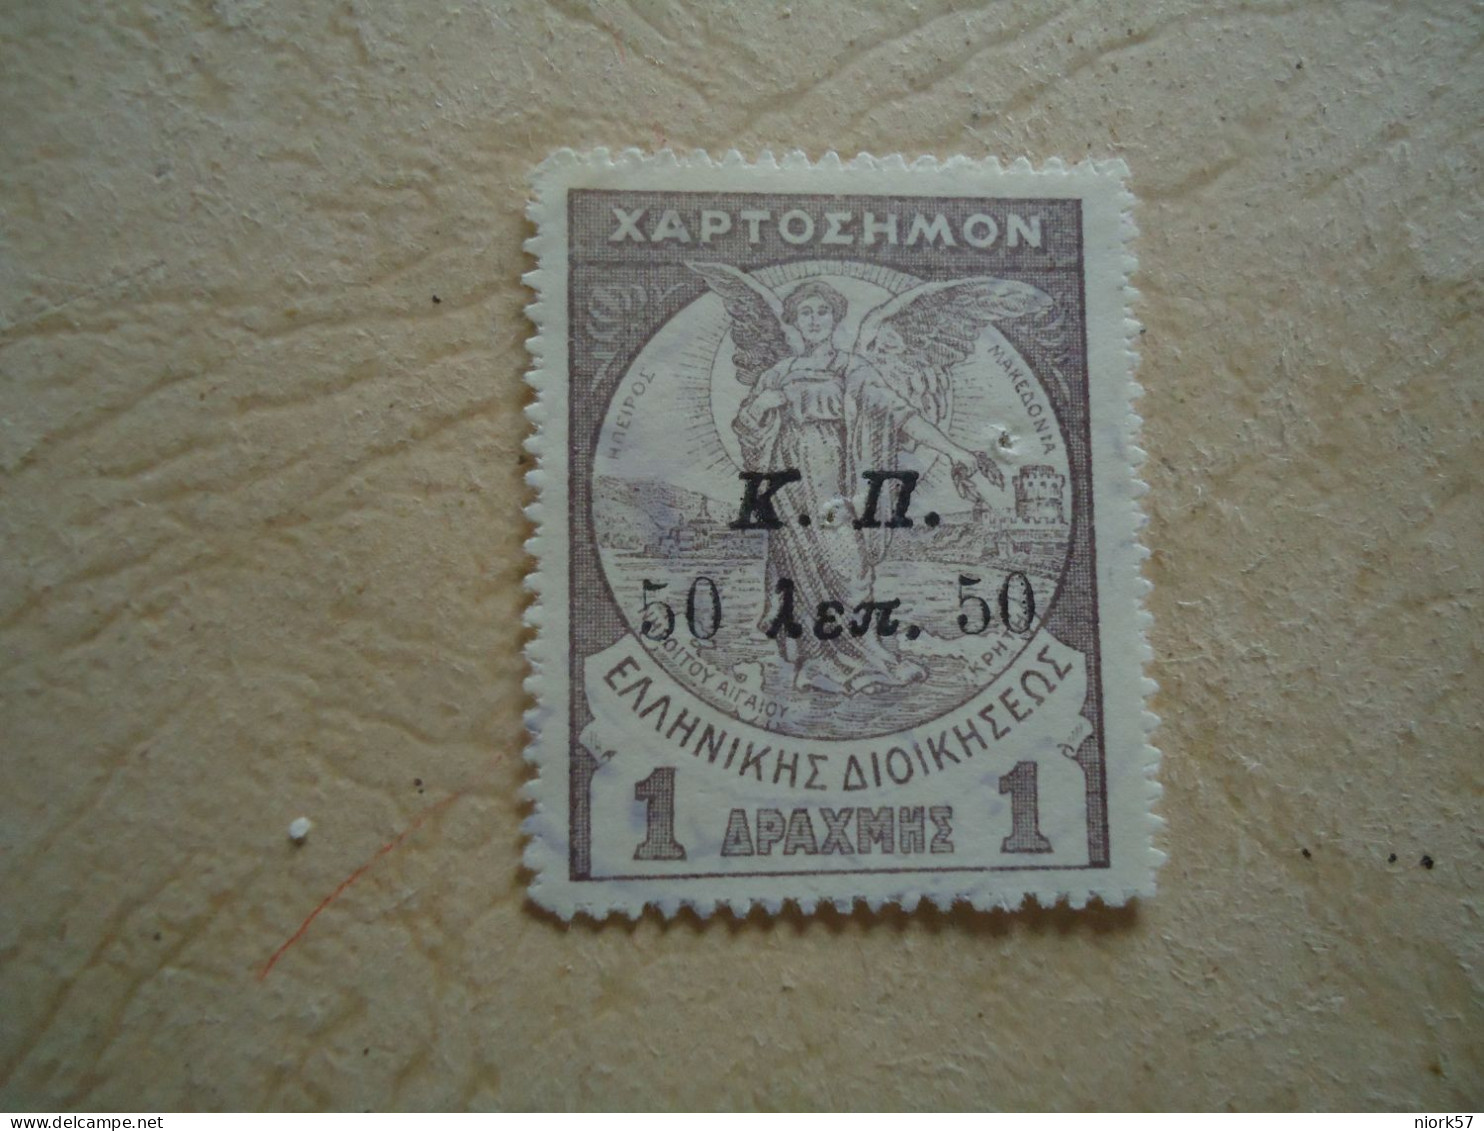 GREECE    ΜΝΗ   STAMPS   CHARITY    Κ.Π  ΛΕΠΤΩΝ 1DR/50L - Used Stamps